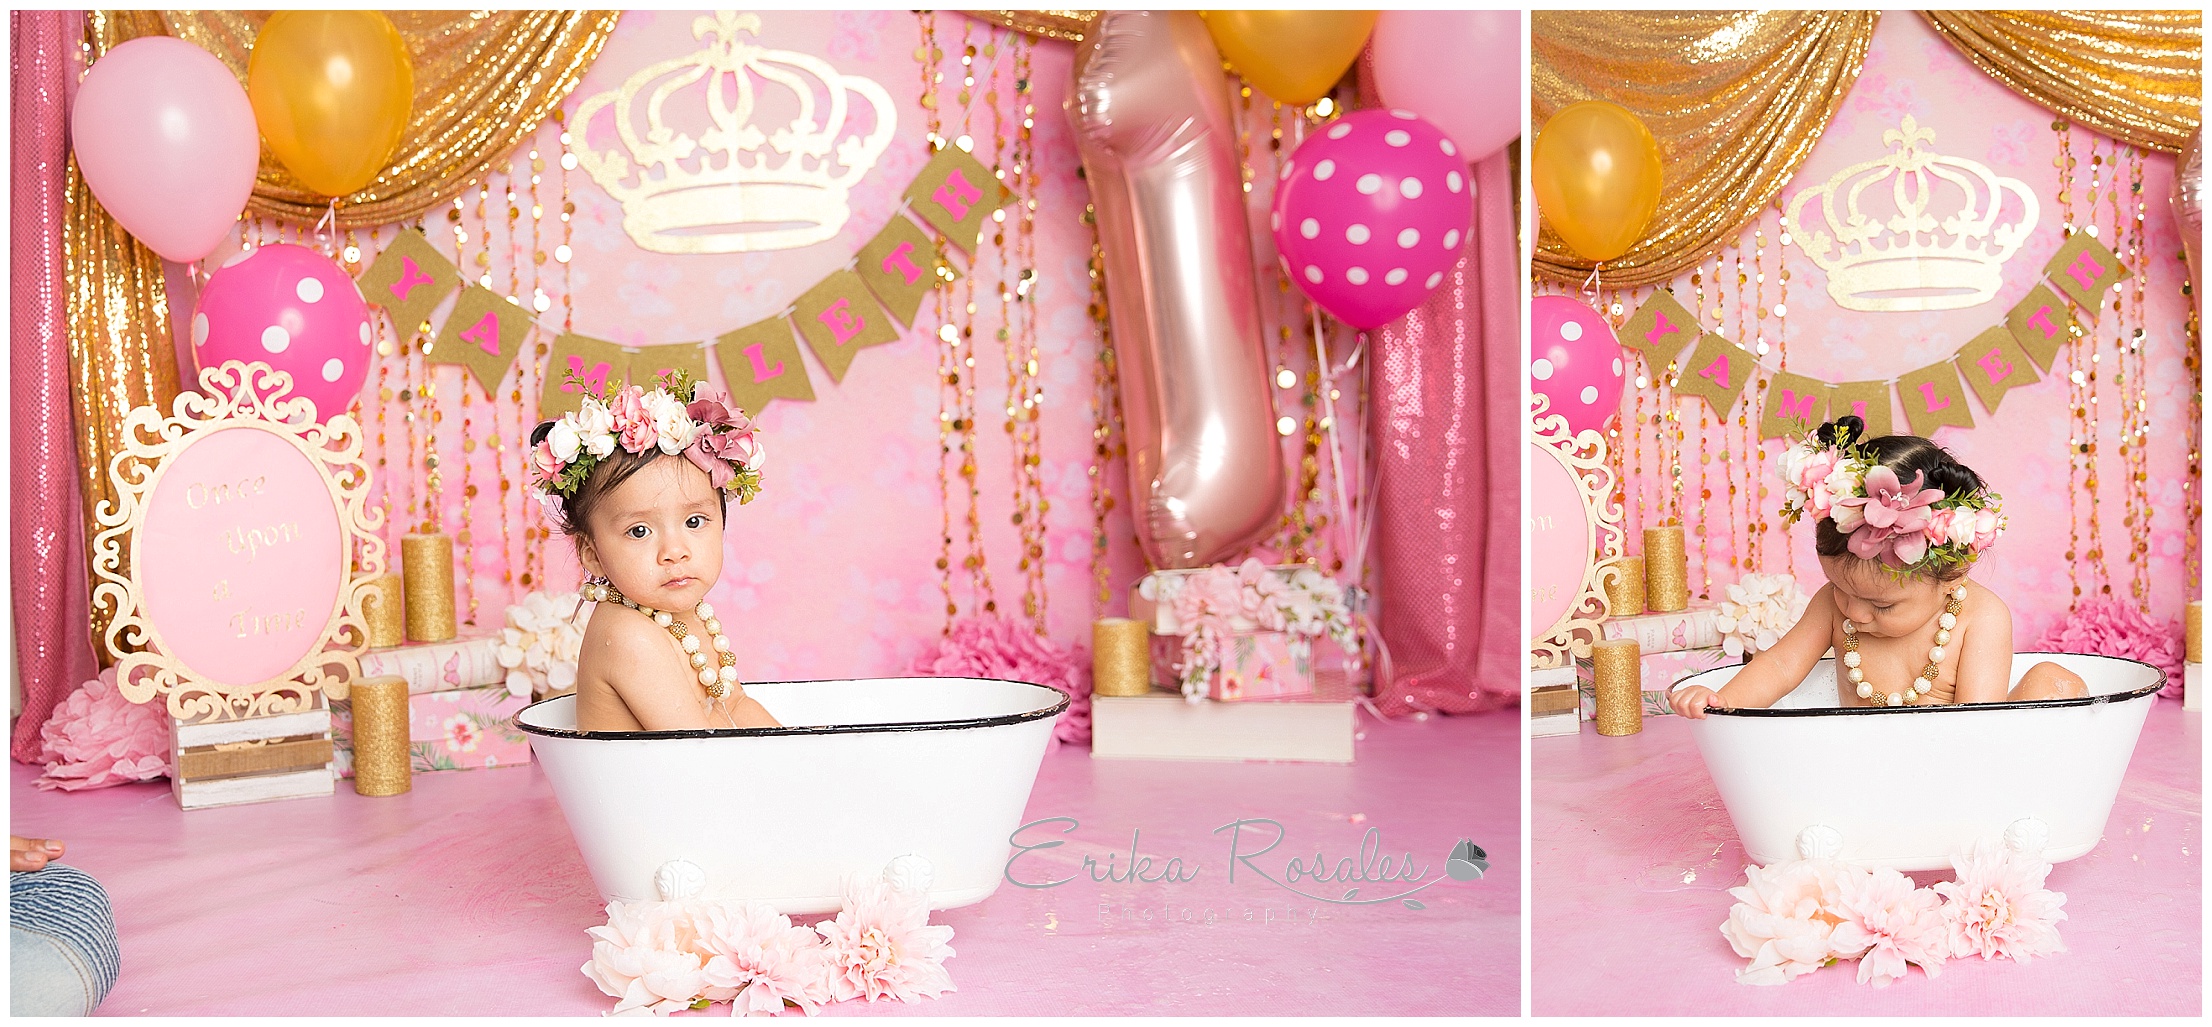 candyland first birthday session Archives - Page 10 of 10 - Erika Rosales  New York Photo Studio